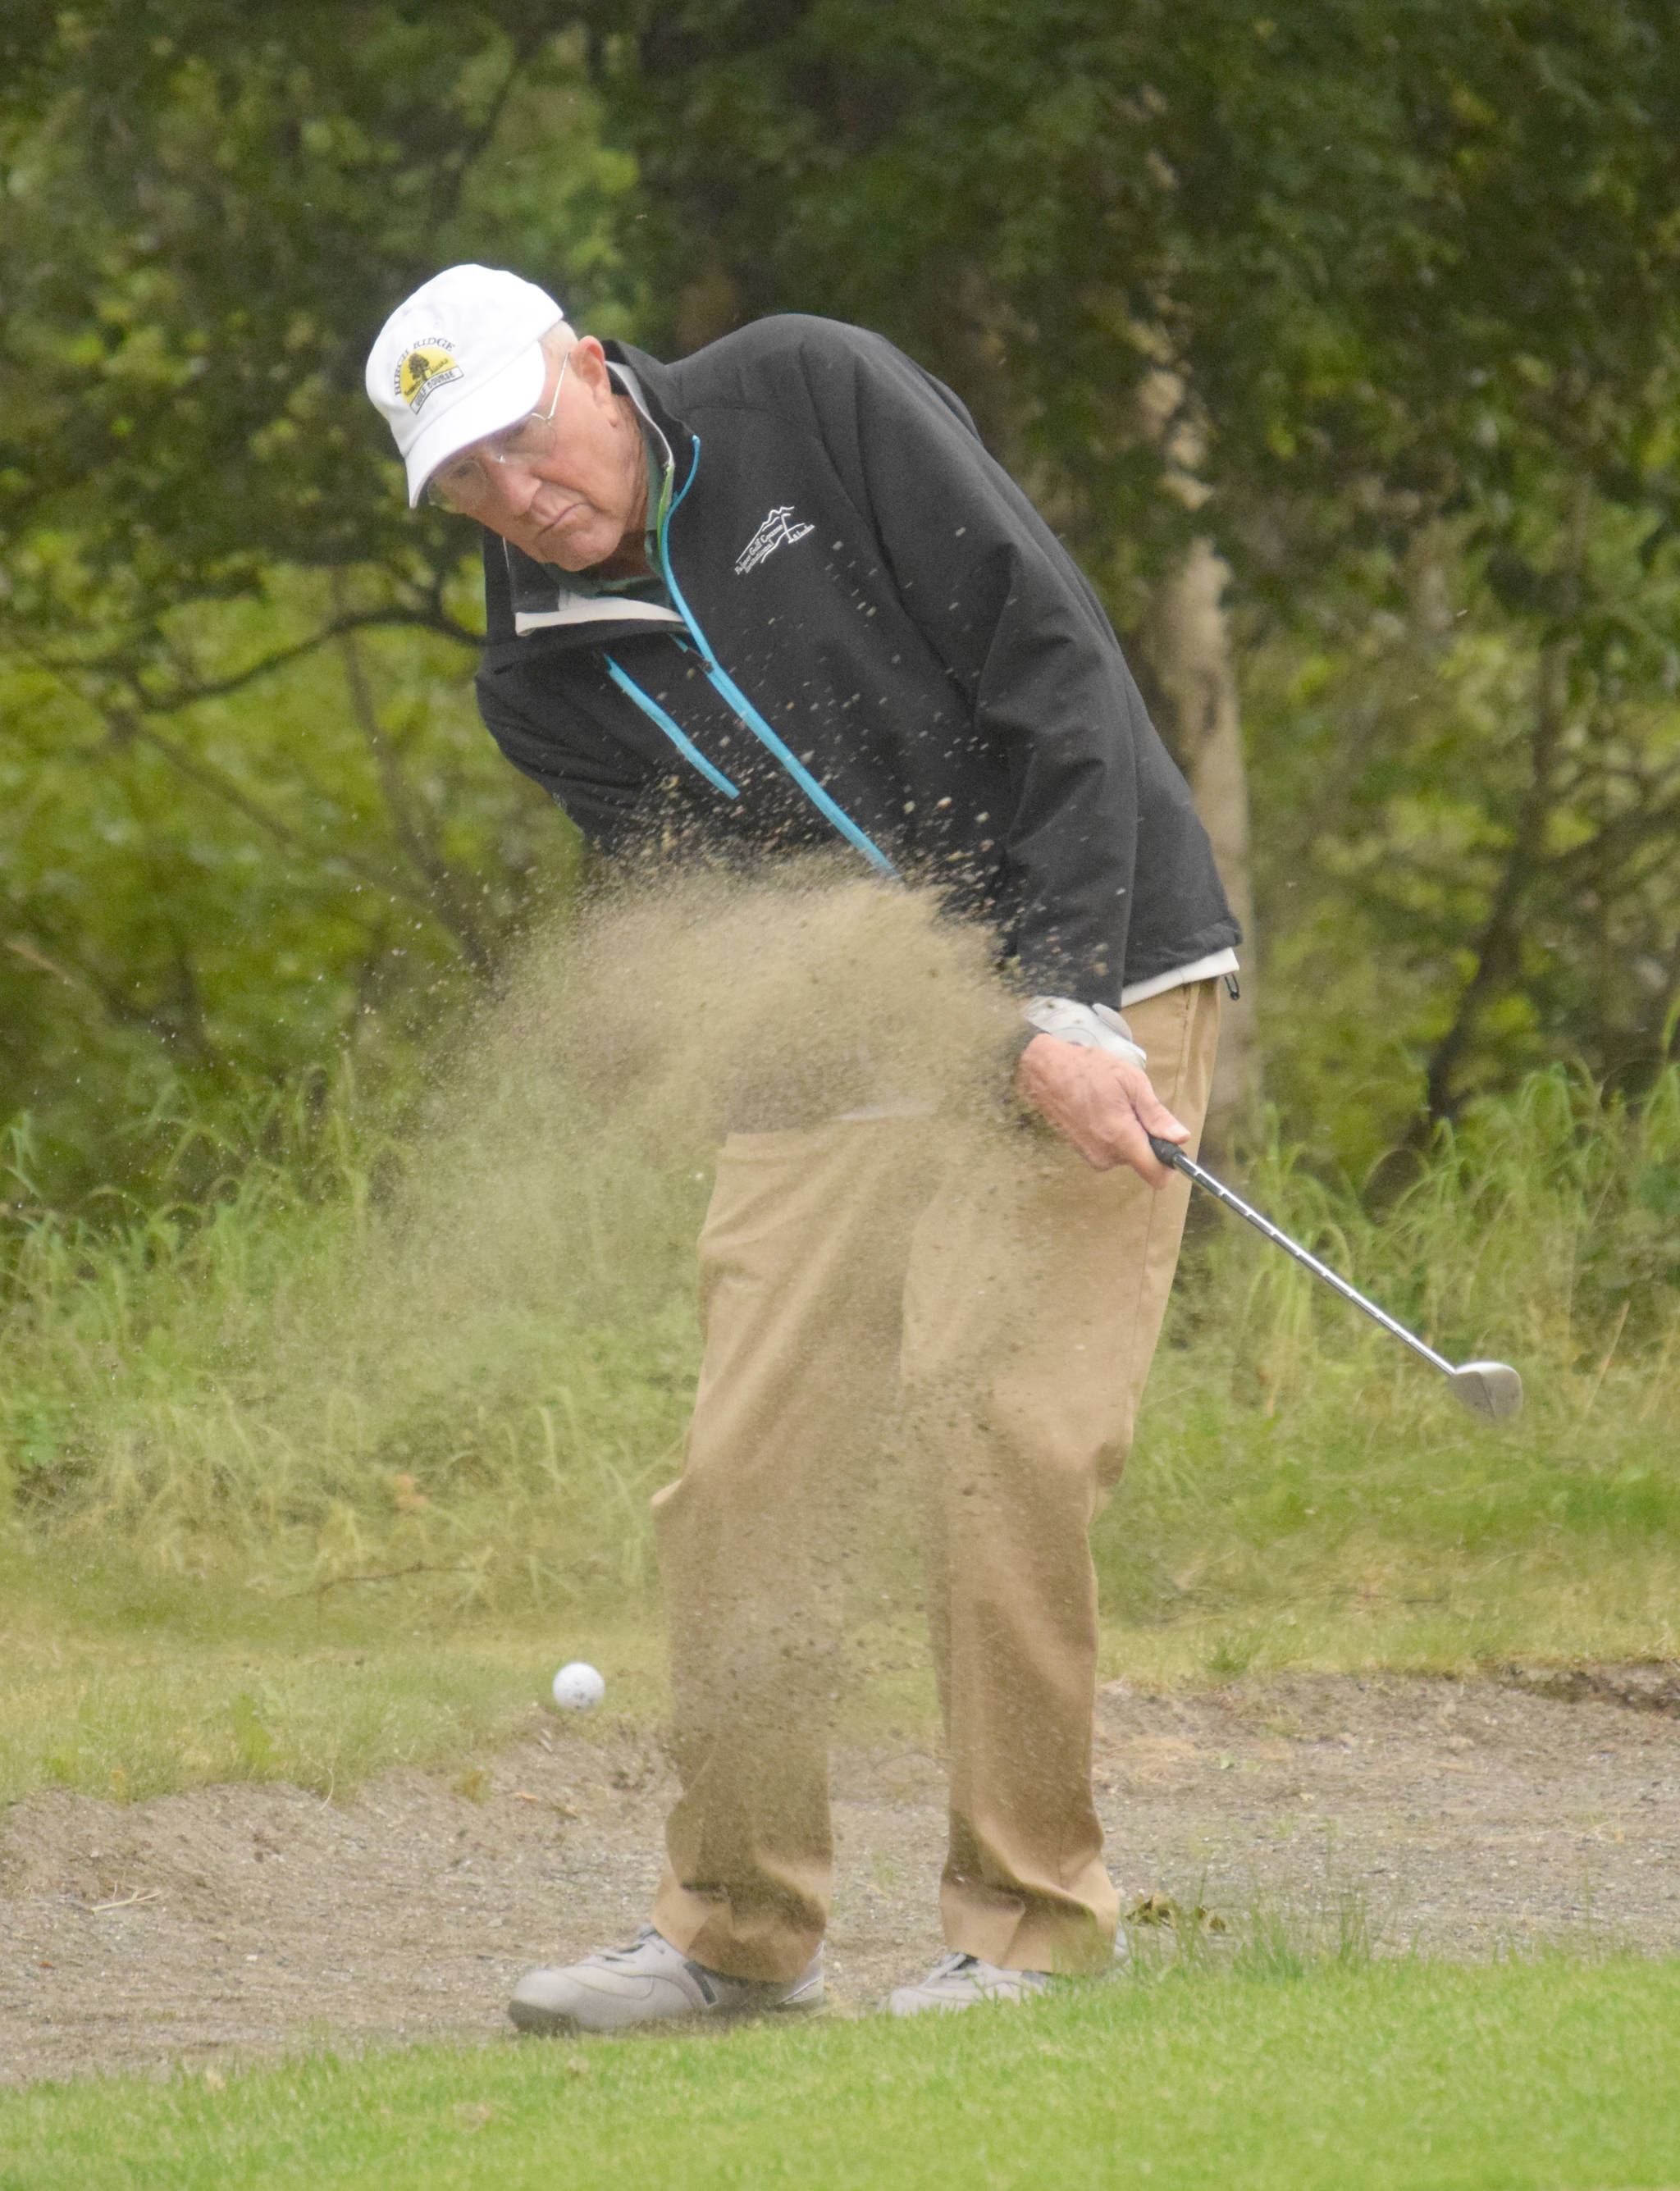 Birch Ridge’s Mike Hollingsworth splashes out of a bunker on the third hole at Kenai Golf Course during the Peninsula Cup on Wednesday, Aug. 18, 2018. (Photo by Jeff Helminiak/Peninsula Clarion)